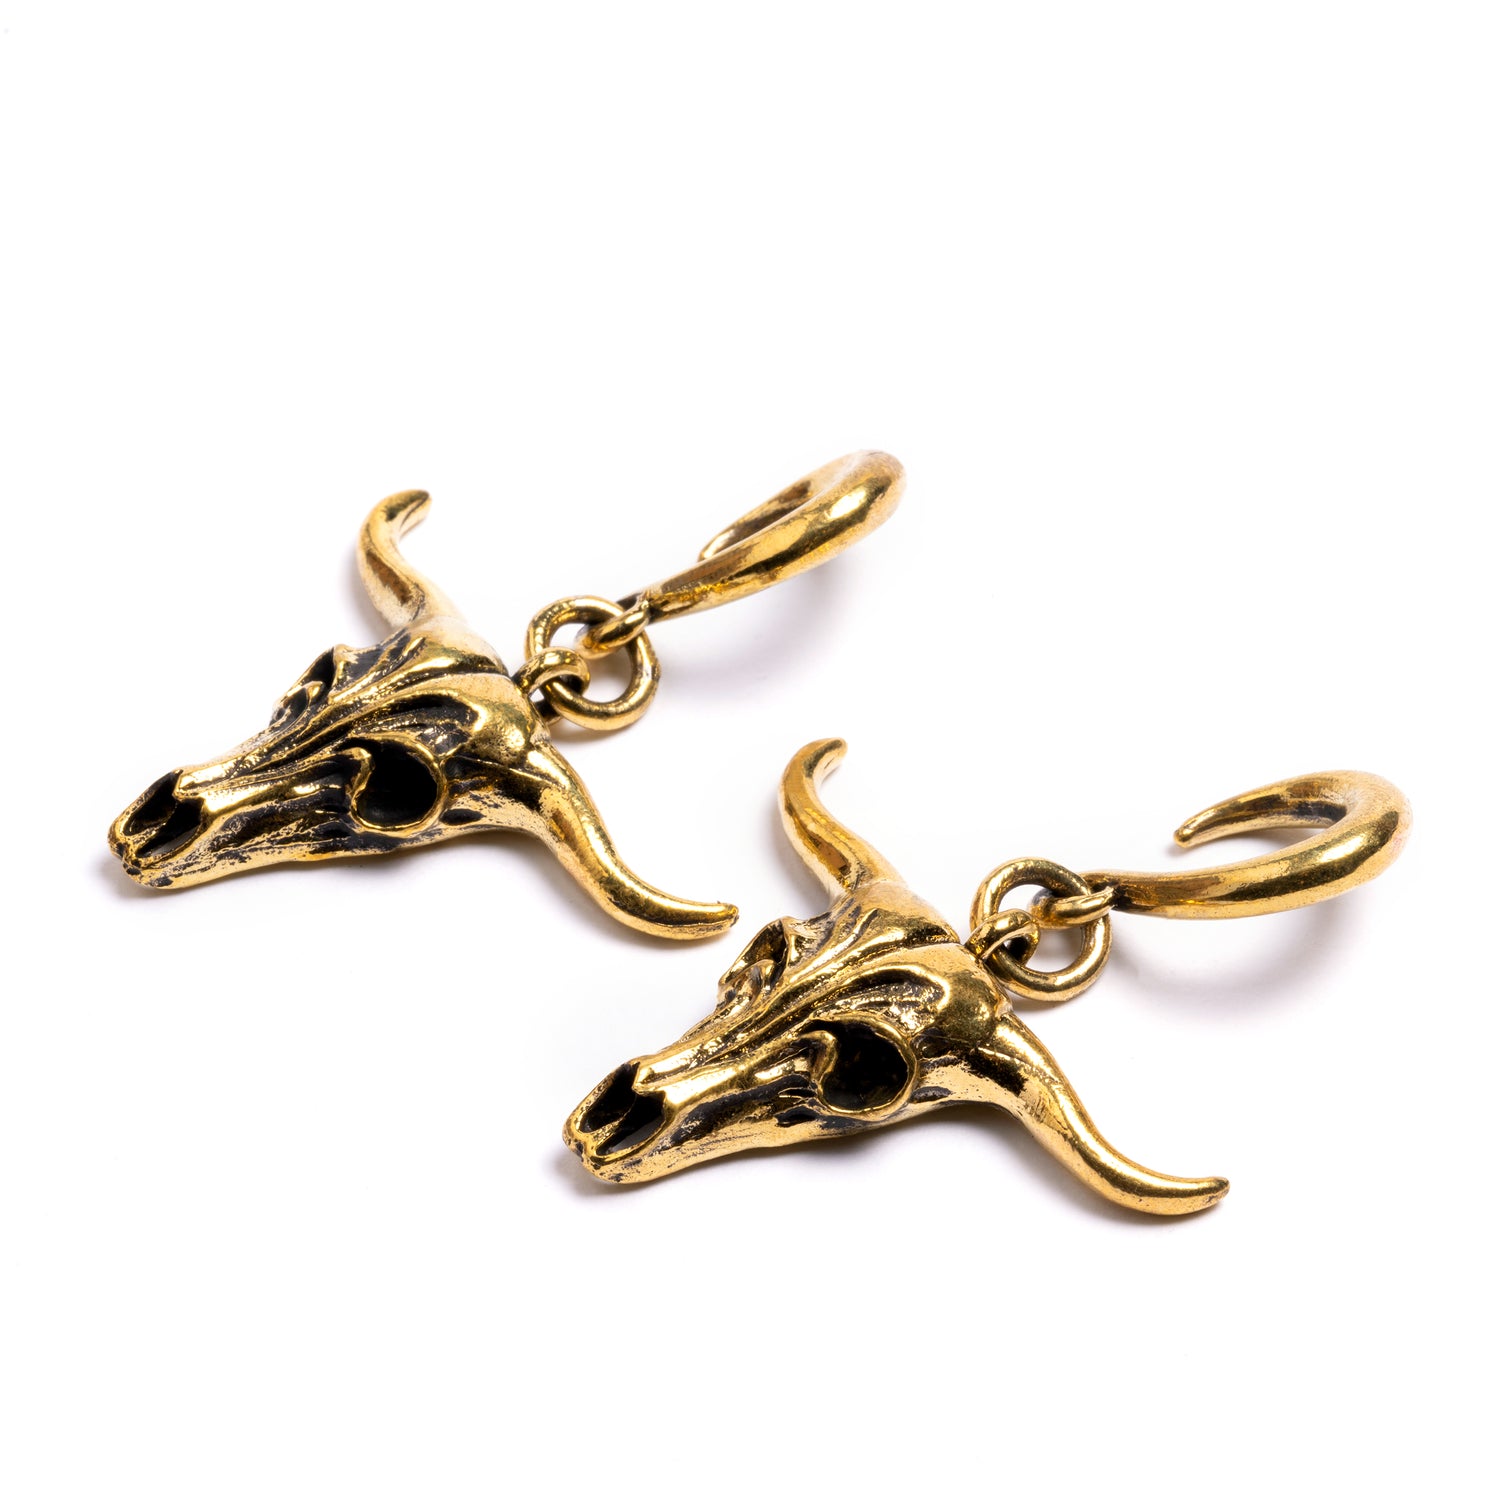 pair of gold brass longhorn skull ear weights hangers side view